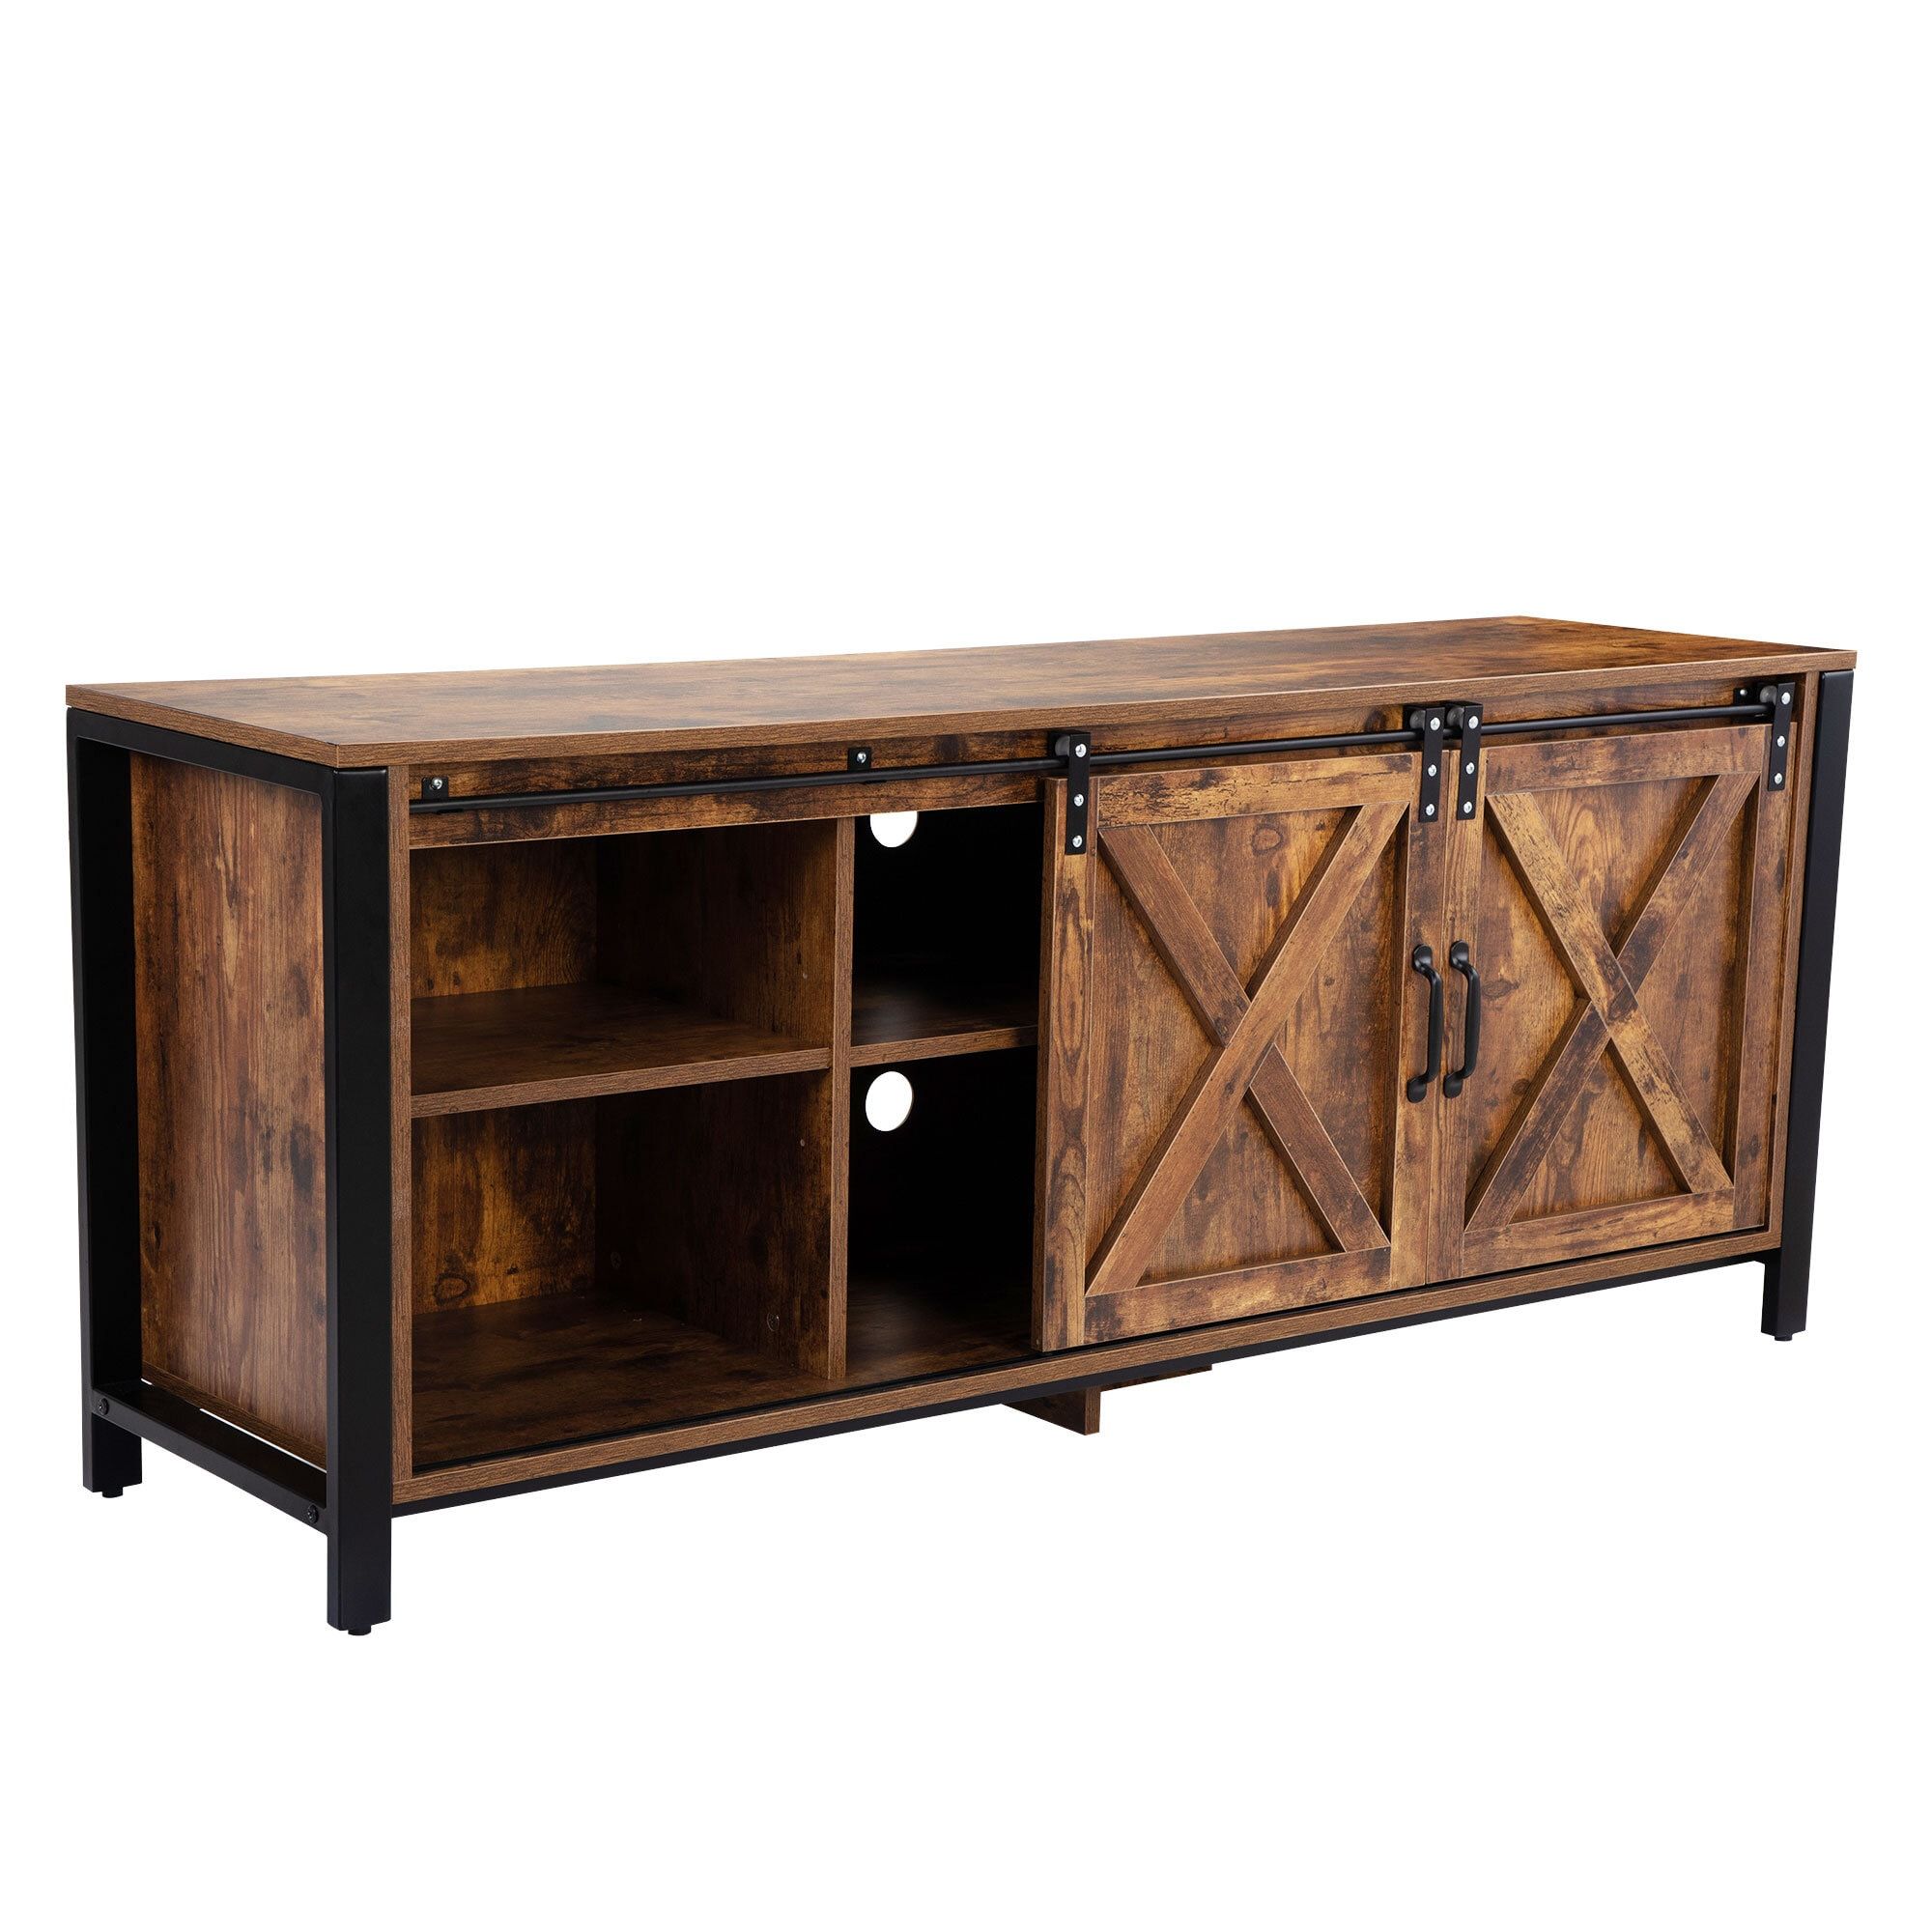 Afoxsos Farmhouse Tv Stand For Tvs Up To 65 In With Sliding Barn Doors And  Adjustable Shelves, Rustic Brown In The Tv Stands Department At Lowes Inside Barn Door Media Tv Stands (View 12 of 15)